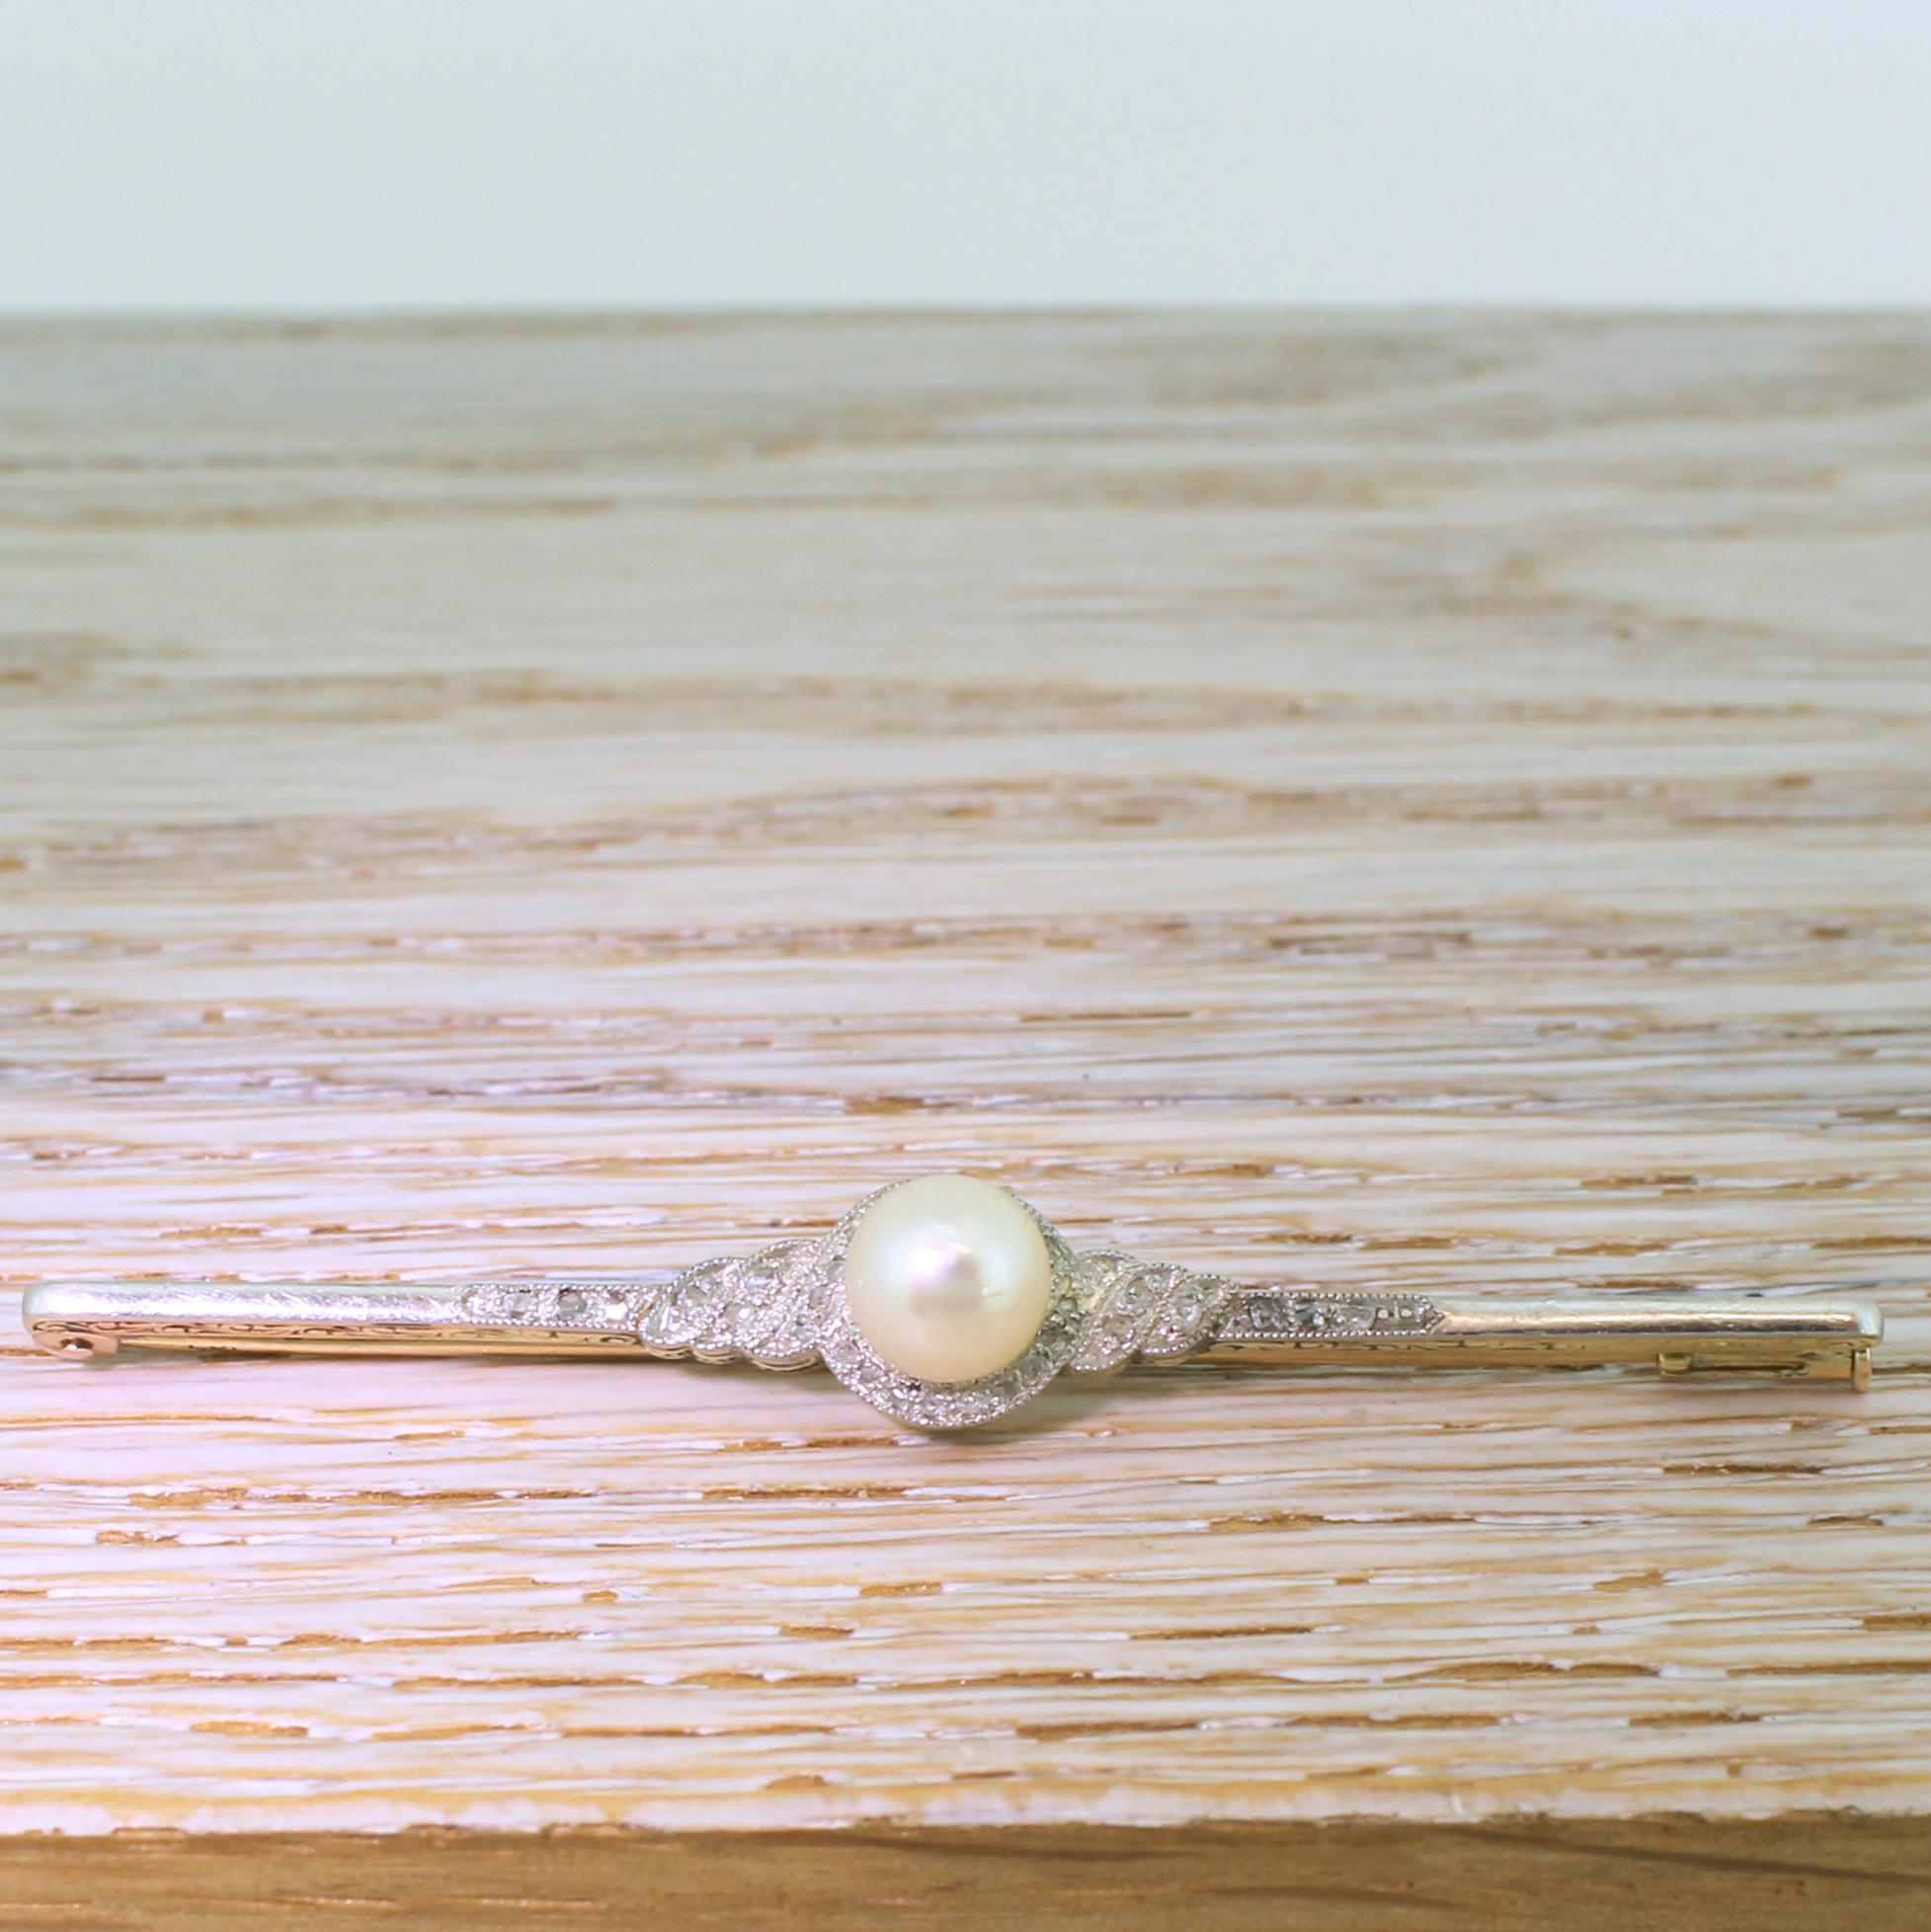 A delightfully elegant antique pearl pin. The cultured pearl in the centre is surrounded by a swirling border thirty-two rose cut diamonds set in platinum, backed in 18k yellow gold. Intricately engraving swirling detailing in the gallery adds